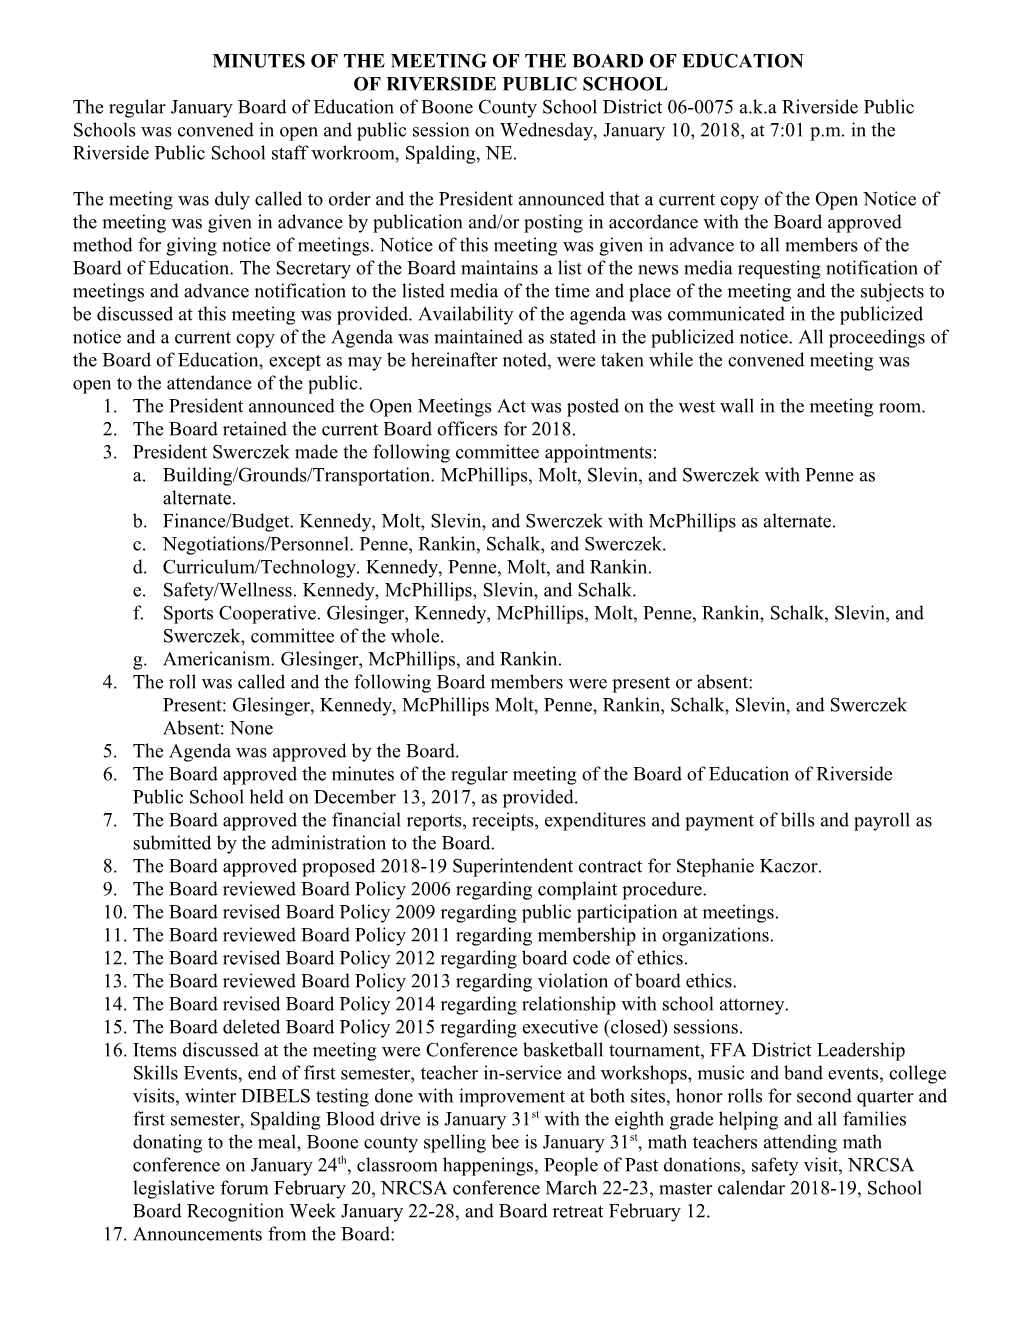 Minutes of the Meeting of the Board of Education